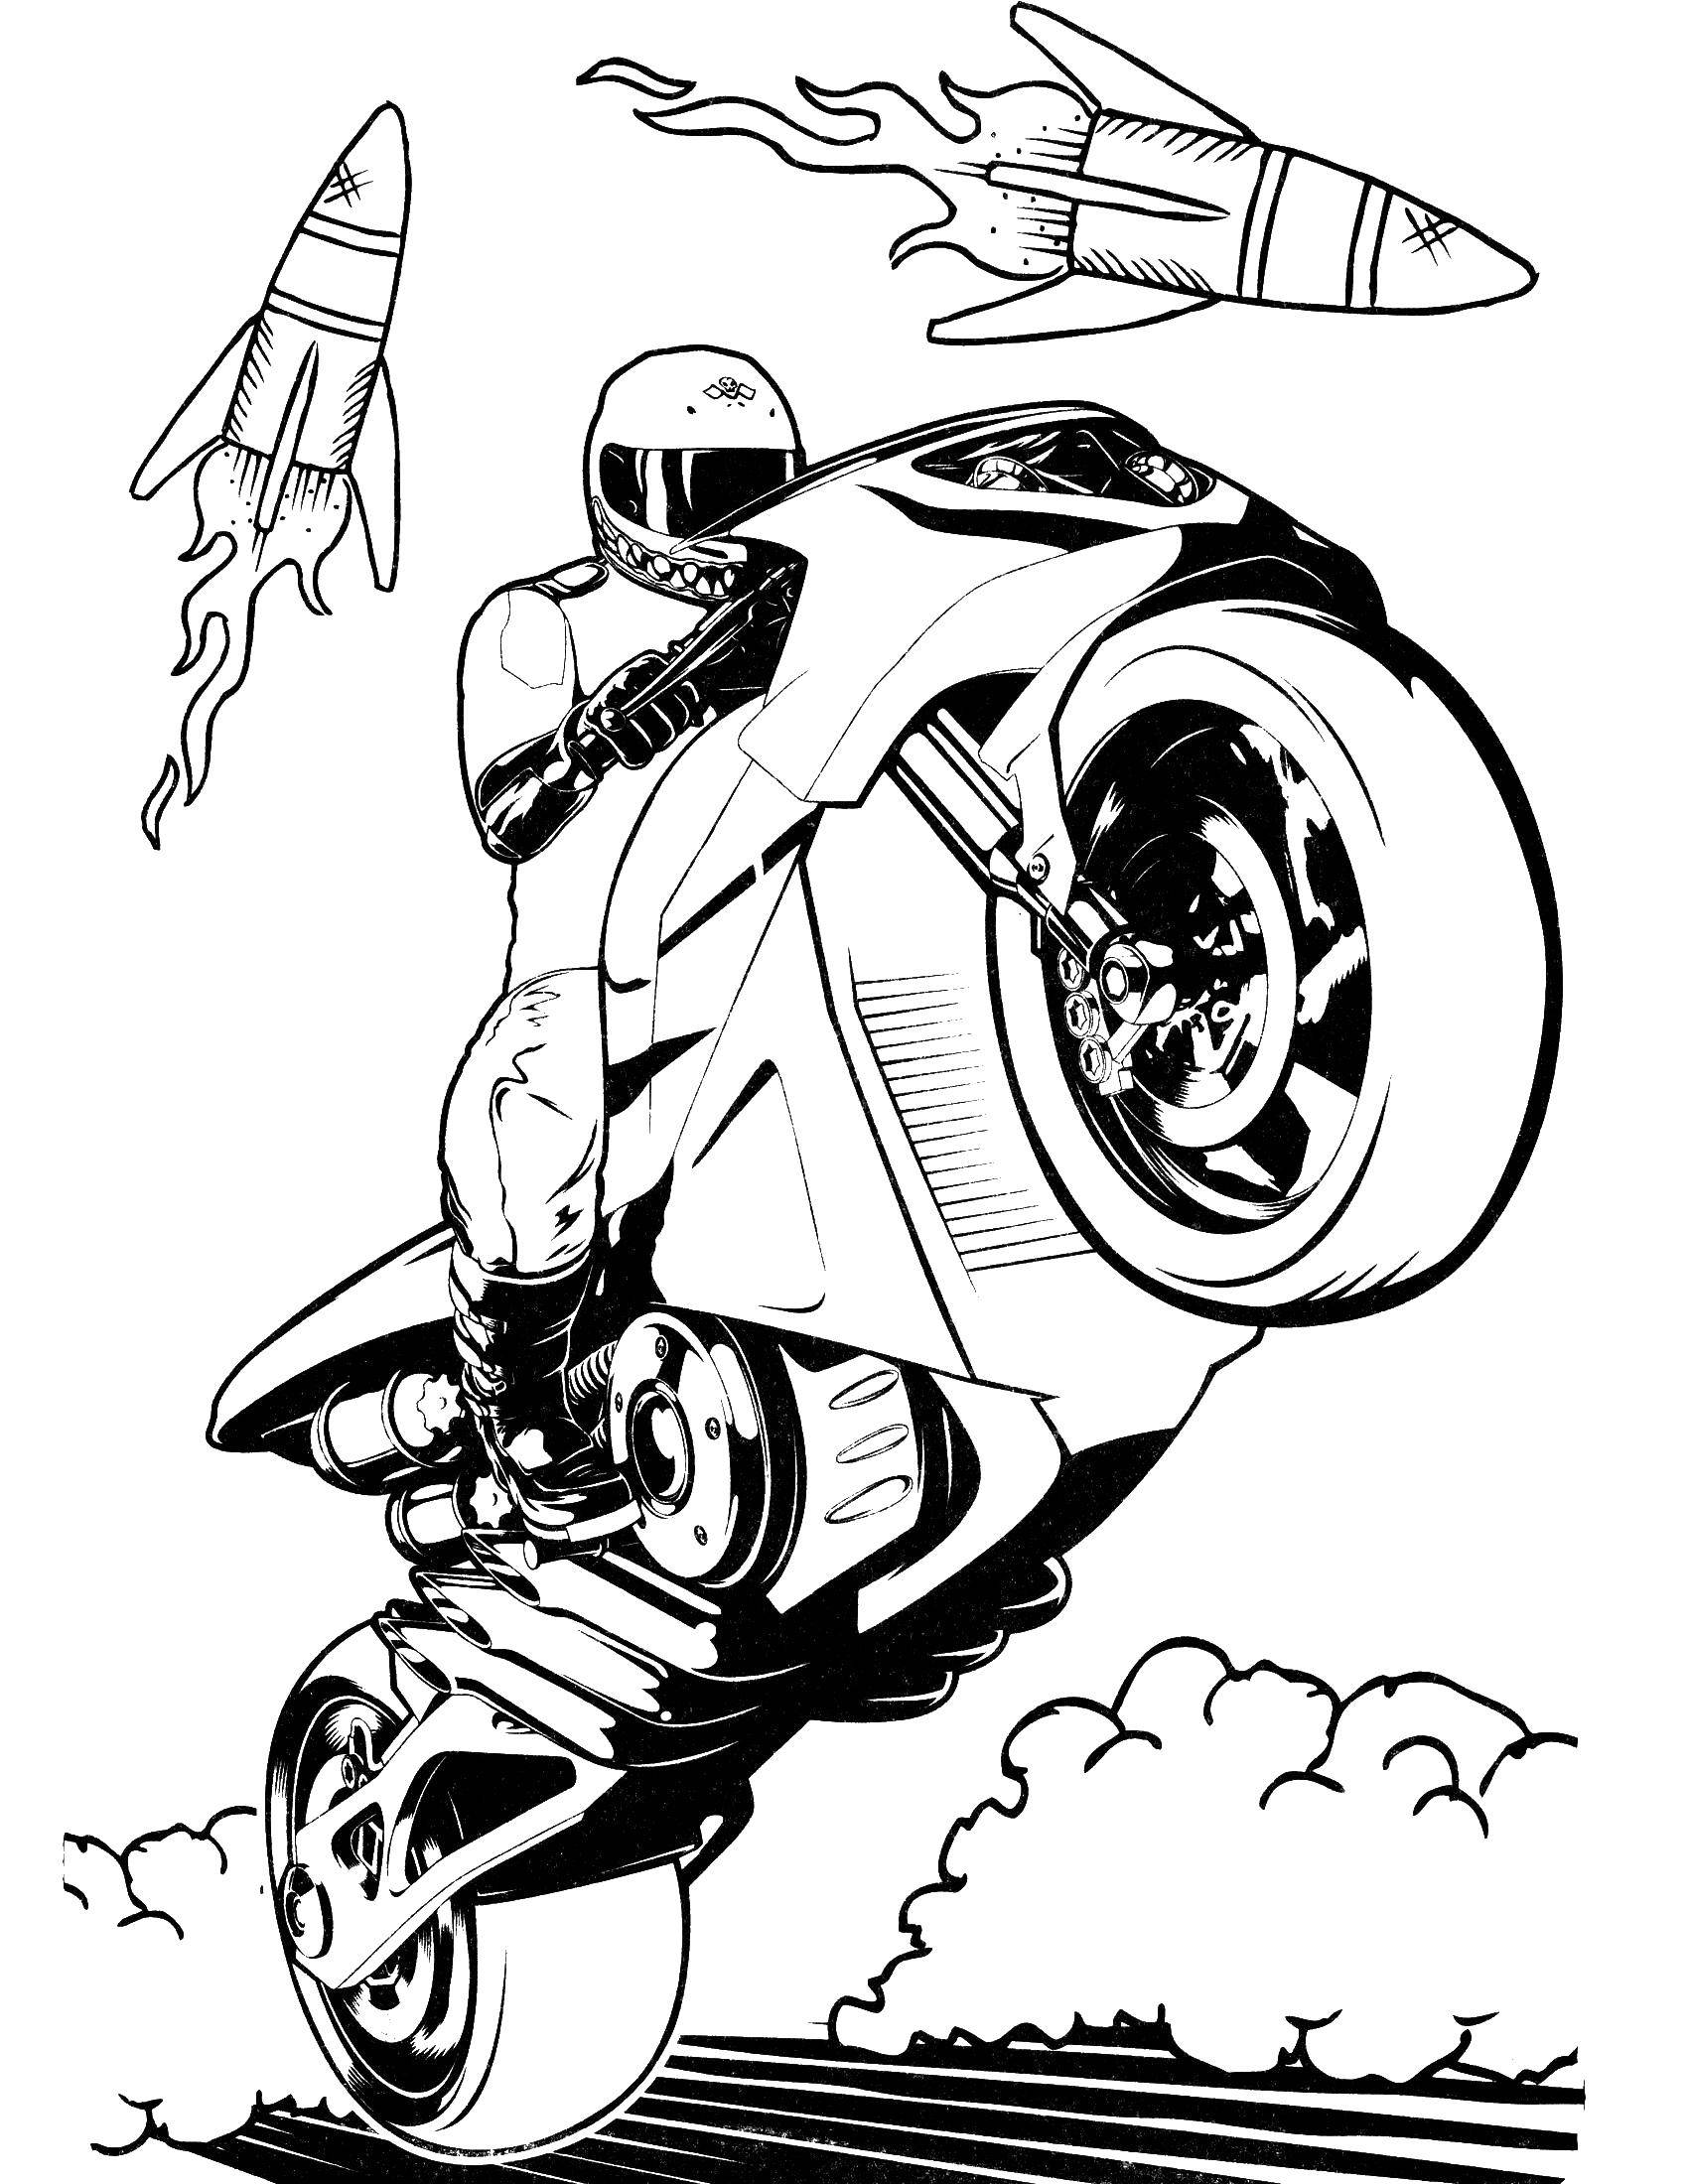 Coloring Motorcycle and missiles. Category coloring. Tags:  motorbike, person, hat, rocket.